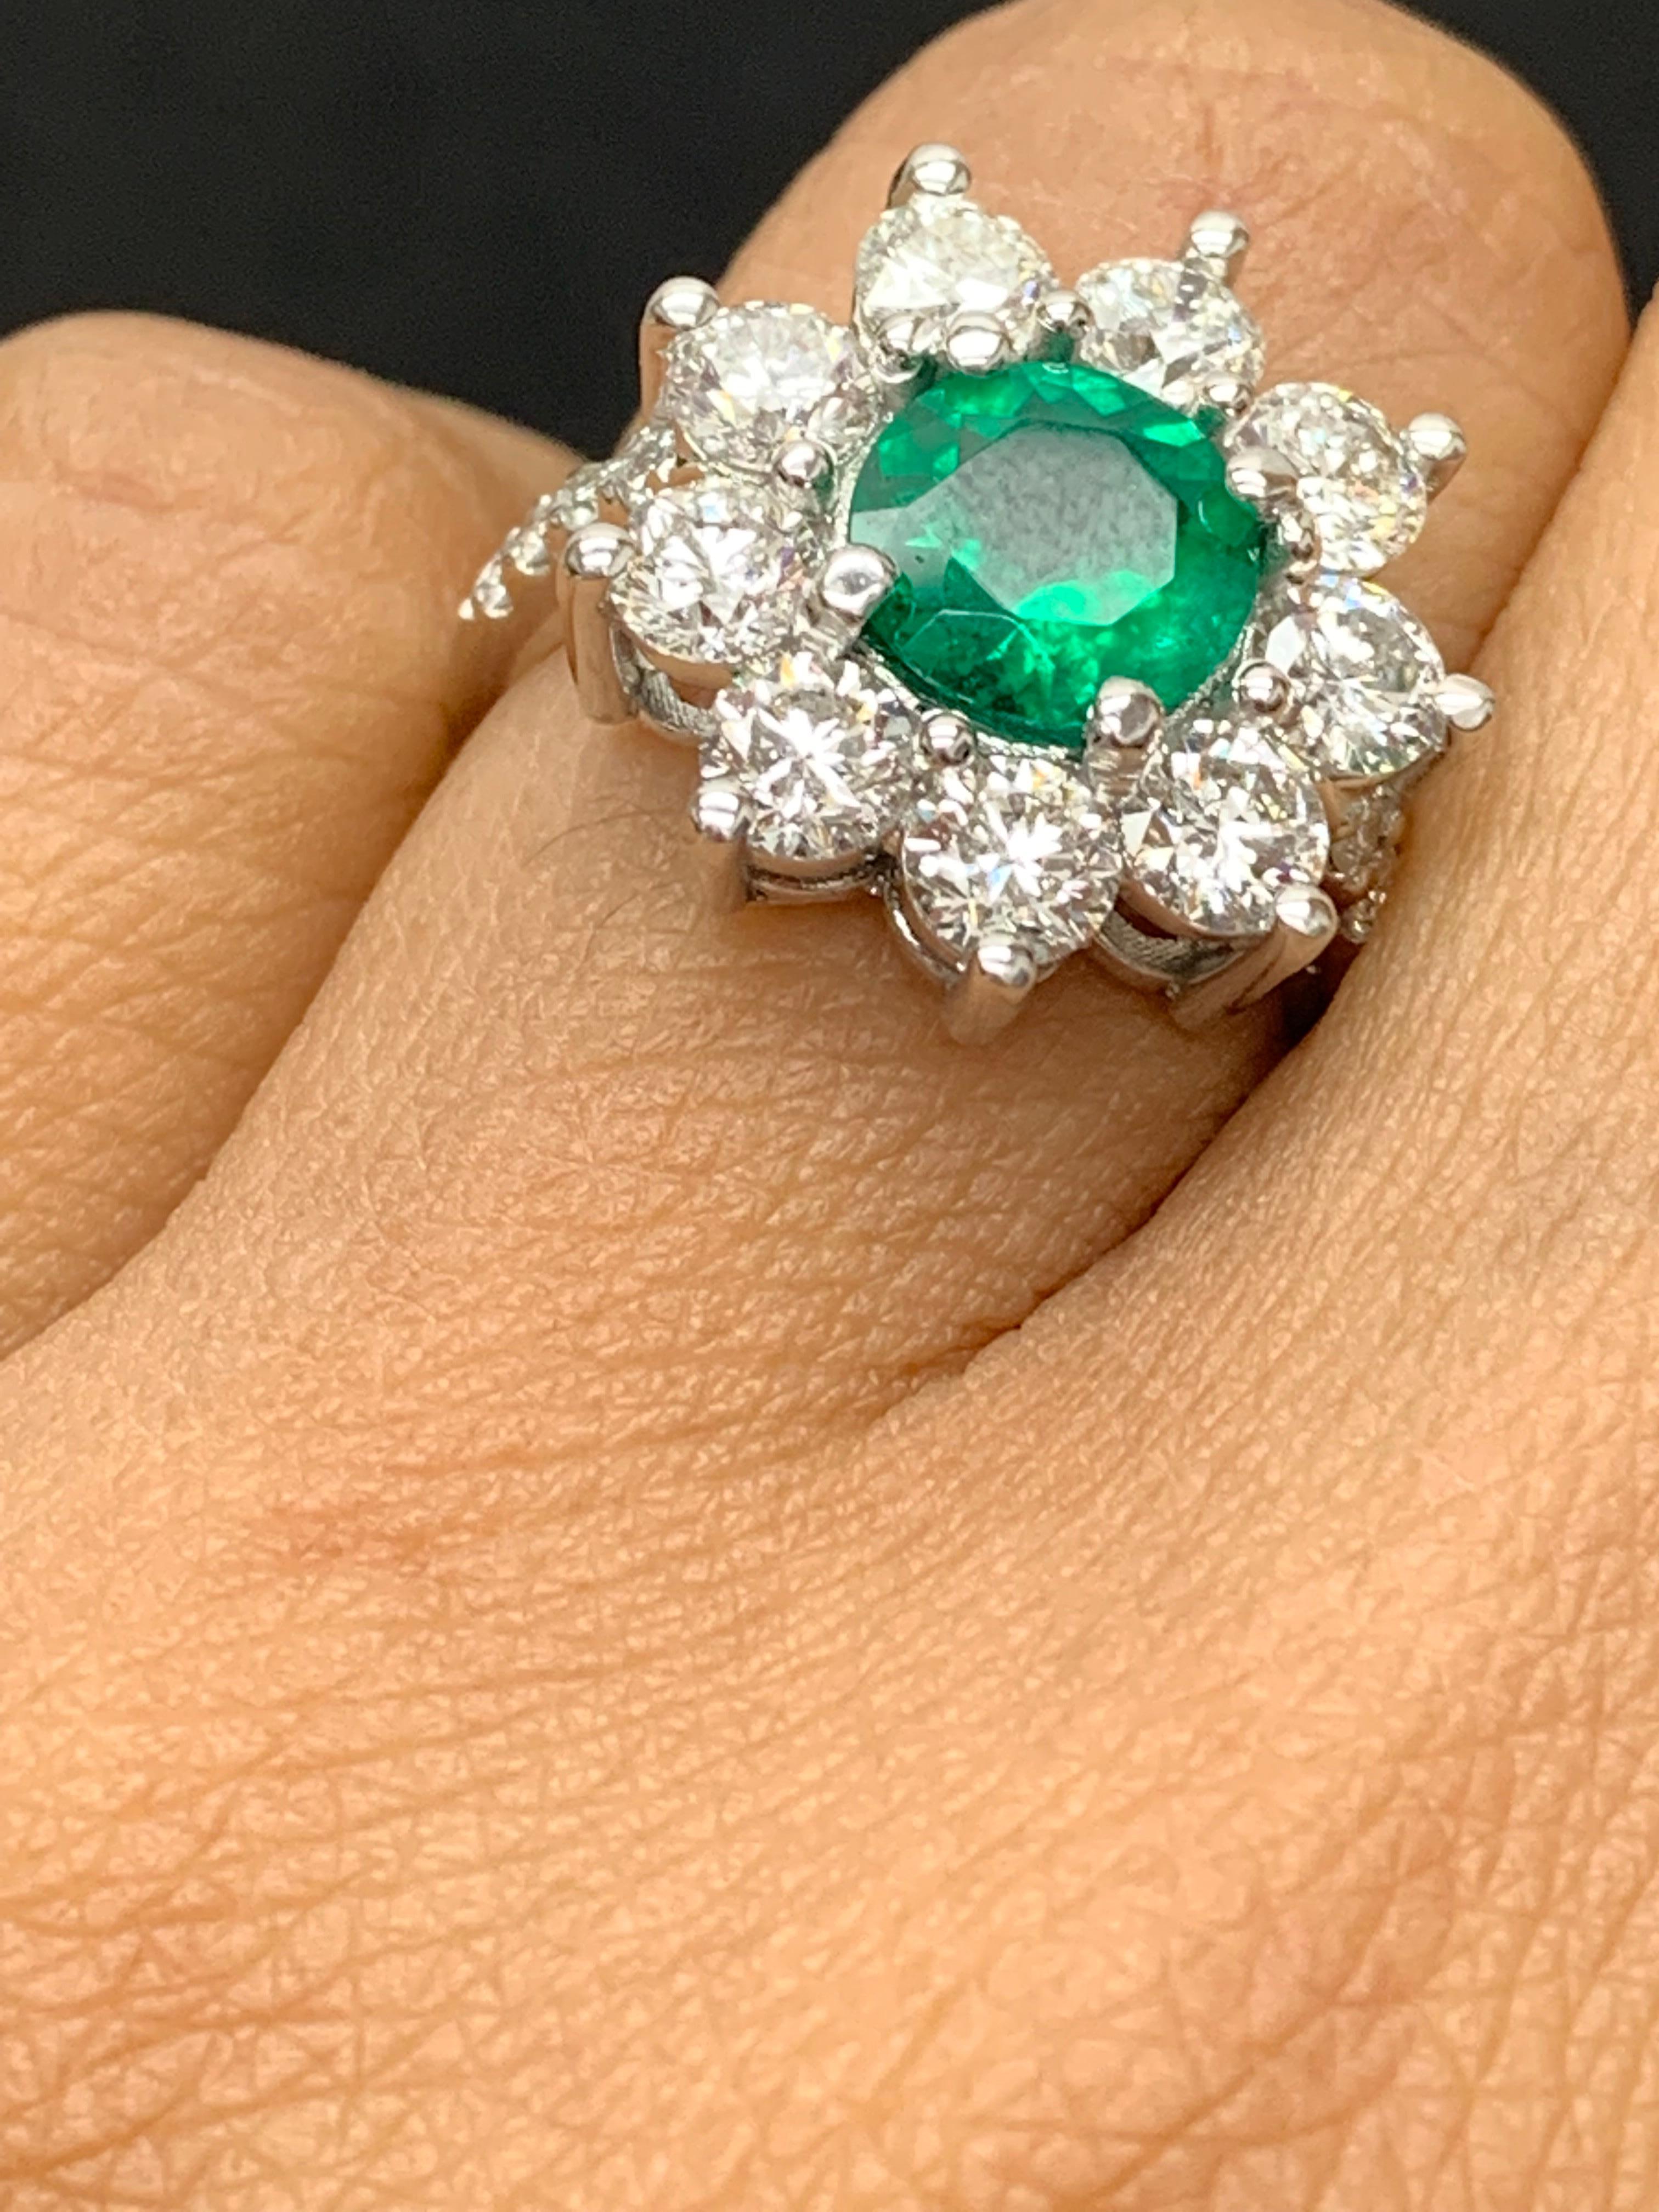 1.18 Carat Brilliant Cut Emerald and Diamond Ring in 14K White Gold For Sale 3